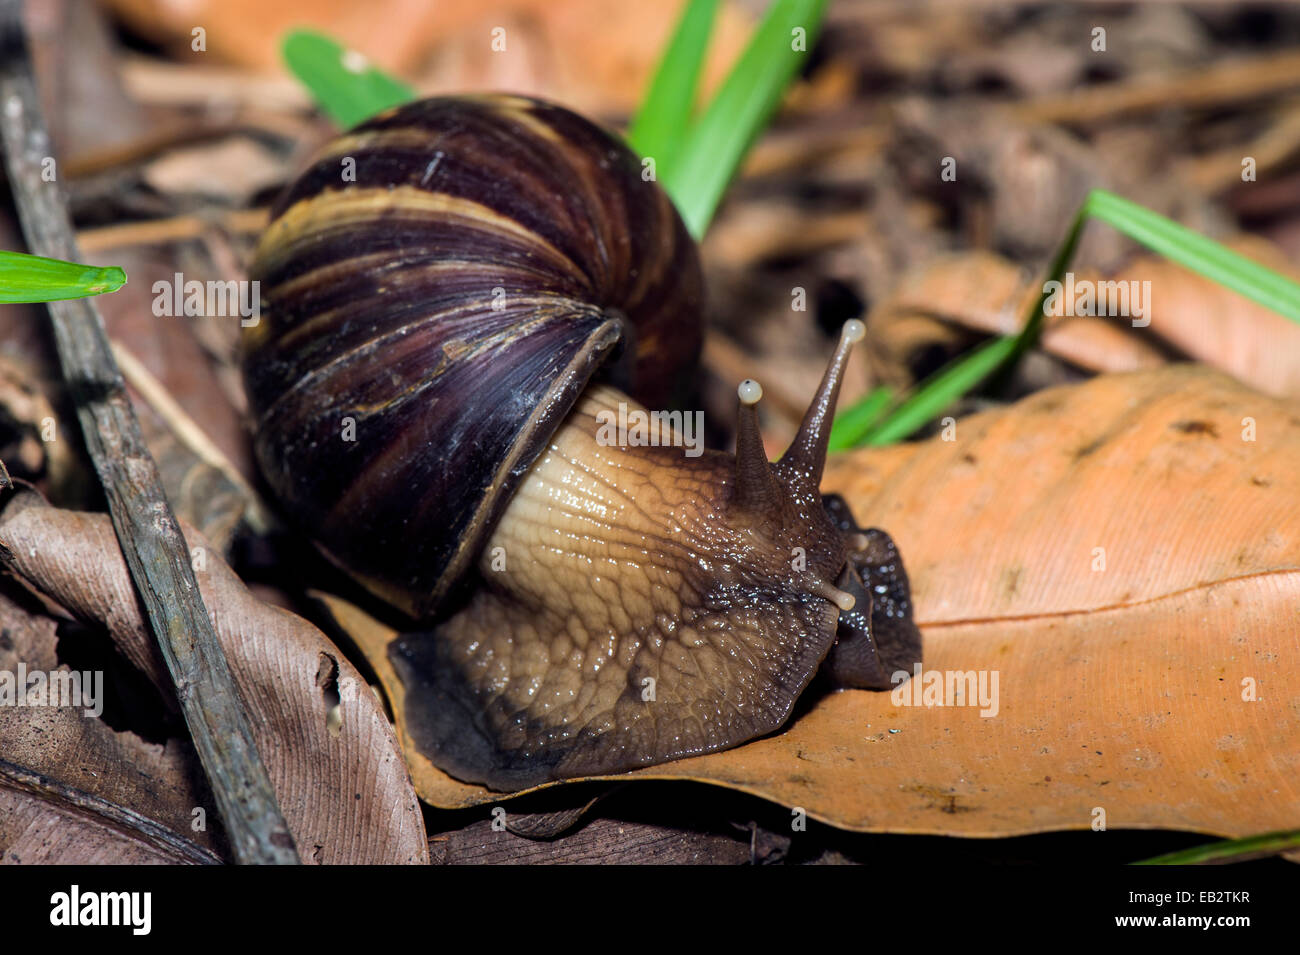 An enormous East African Land Snails foraging for food on dead leaves on the forest floor. Stock Photo